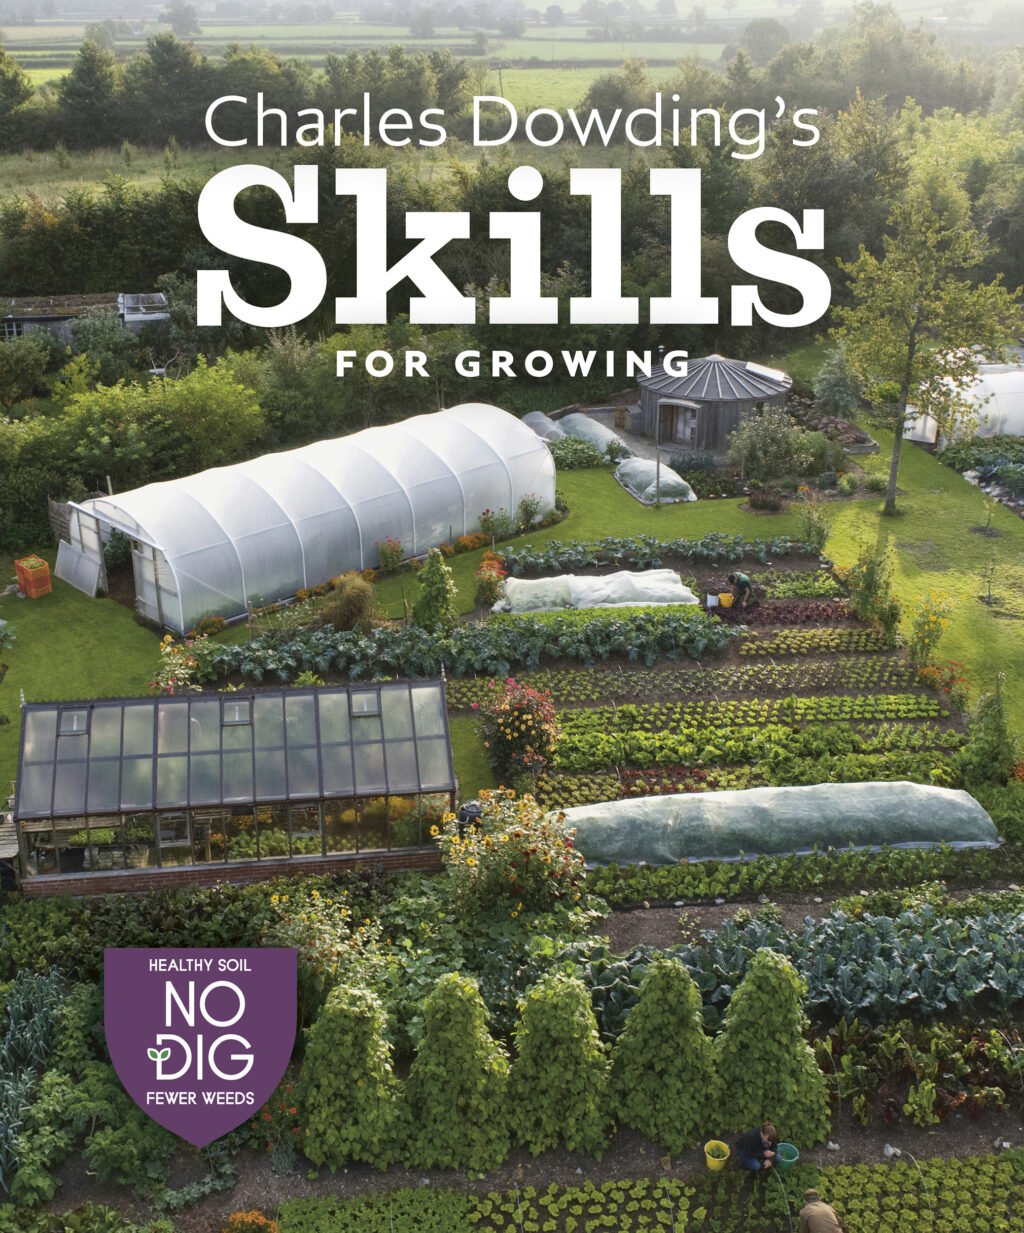 The Charles Dowding’s Skills For Growing cover